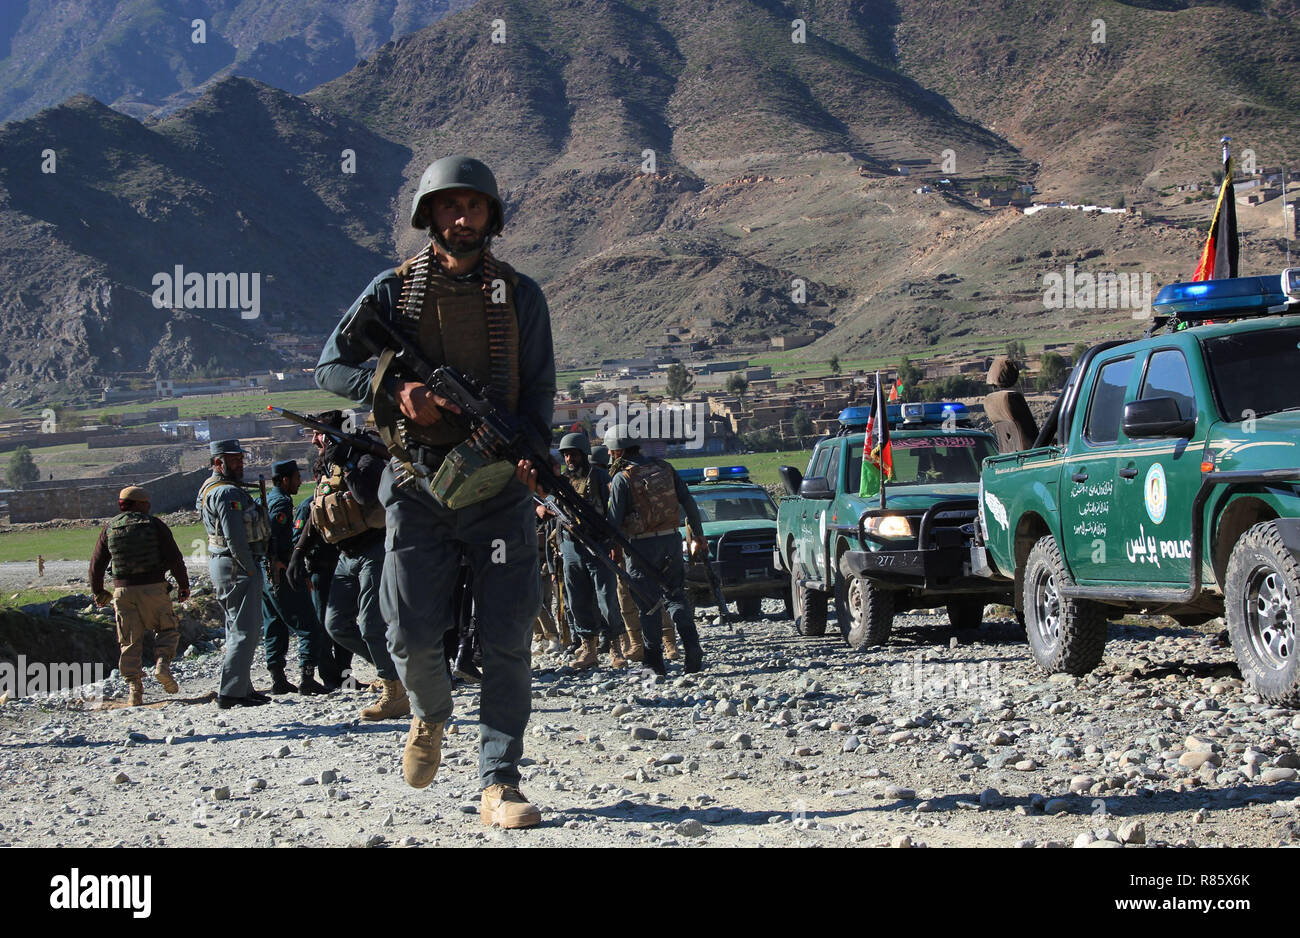 Assadabad, Afghanistan. 13th Dec, 2018. Afghan security force members take part in a military operation in Kunar province, Afghanistan, Dec. 13, 2018. Eight militants including a commander affiliated with the Islamic State (IS) outfit have been killed in the eastern Kunar province, an army commander in the province, Mirwais Sapi, said Thursday. Credit: Emran Waak/Xinhua/Alamy Live News Stock Photo